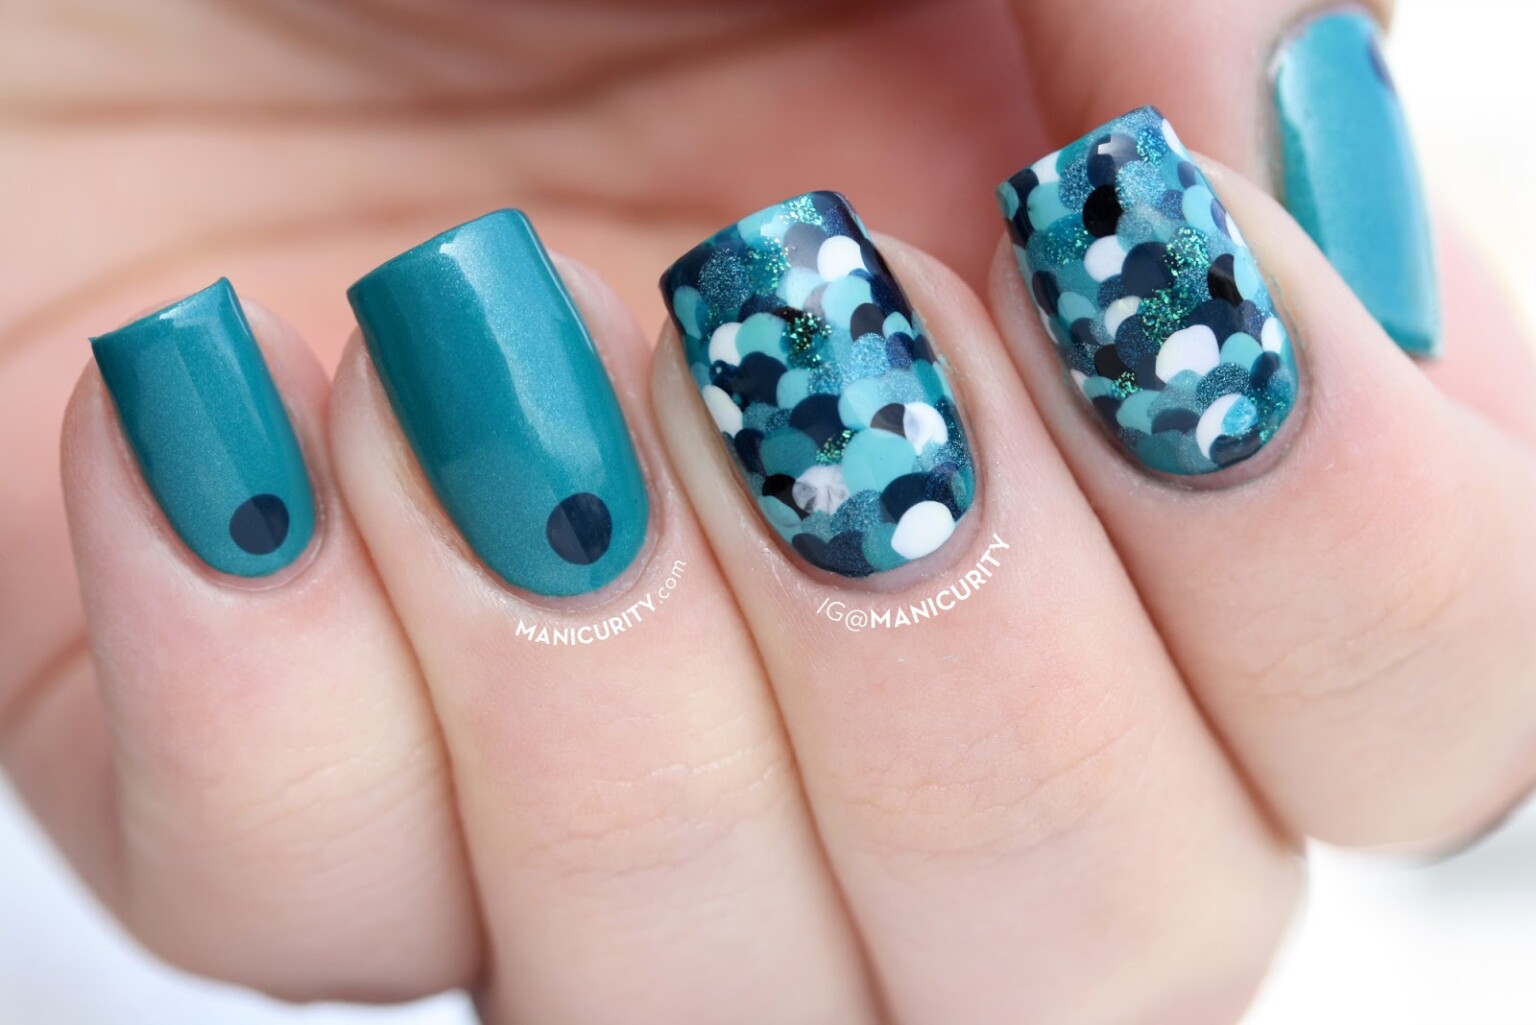 3. "Creative Nail Art Images for Your Next Manicure" - wide 2